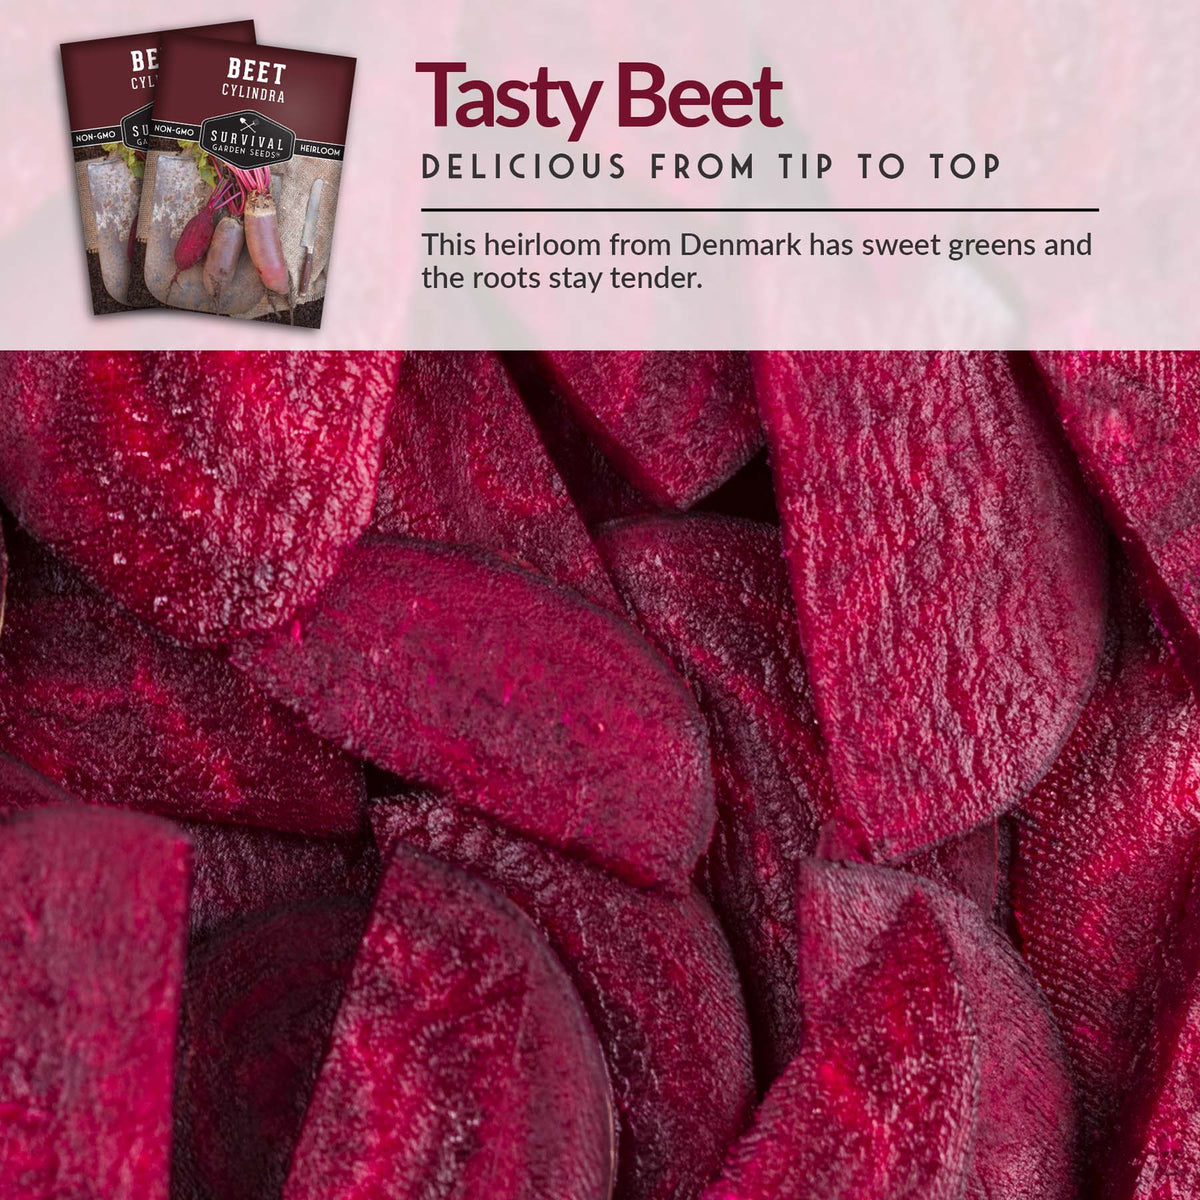 Cylindra beets are an heirloom beet from Denmark